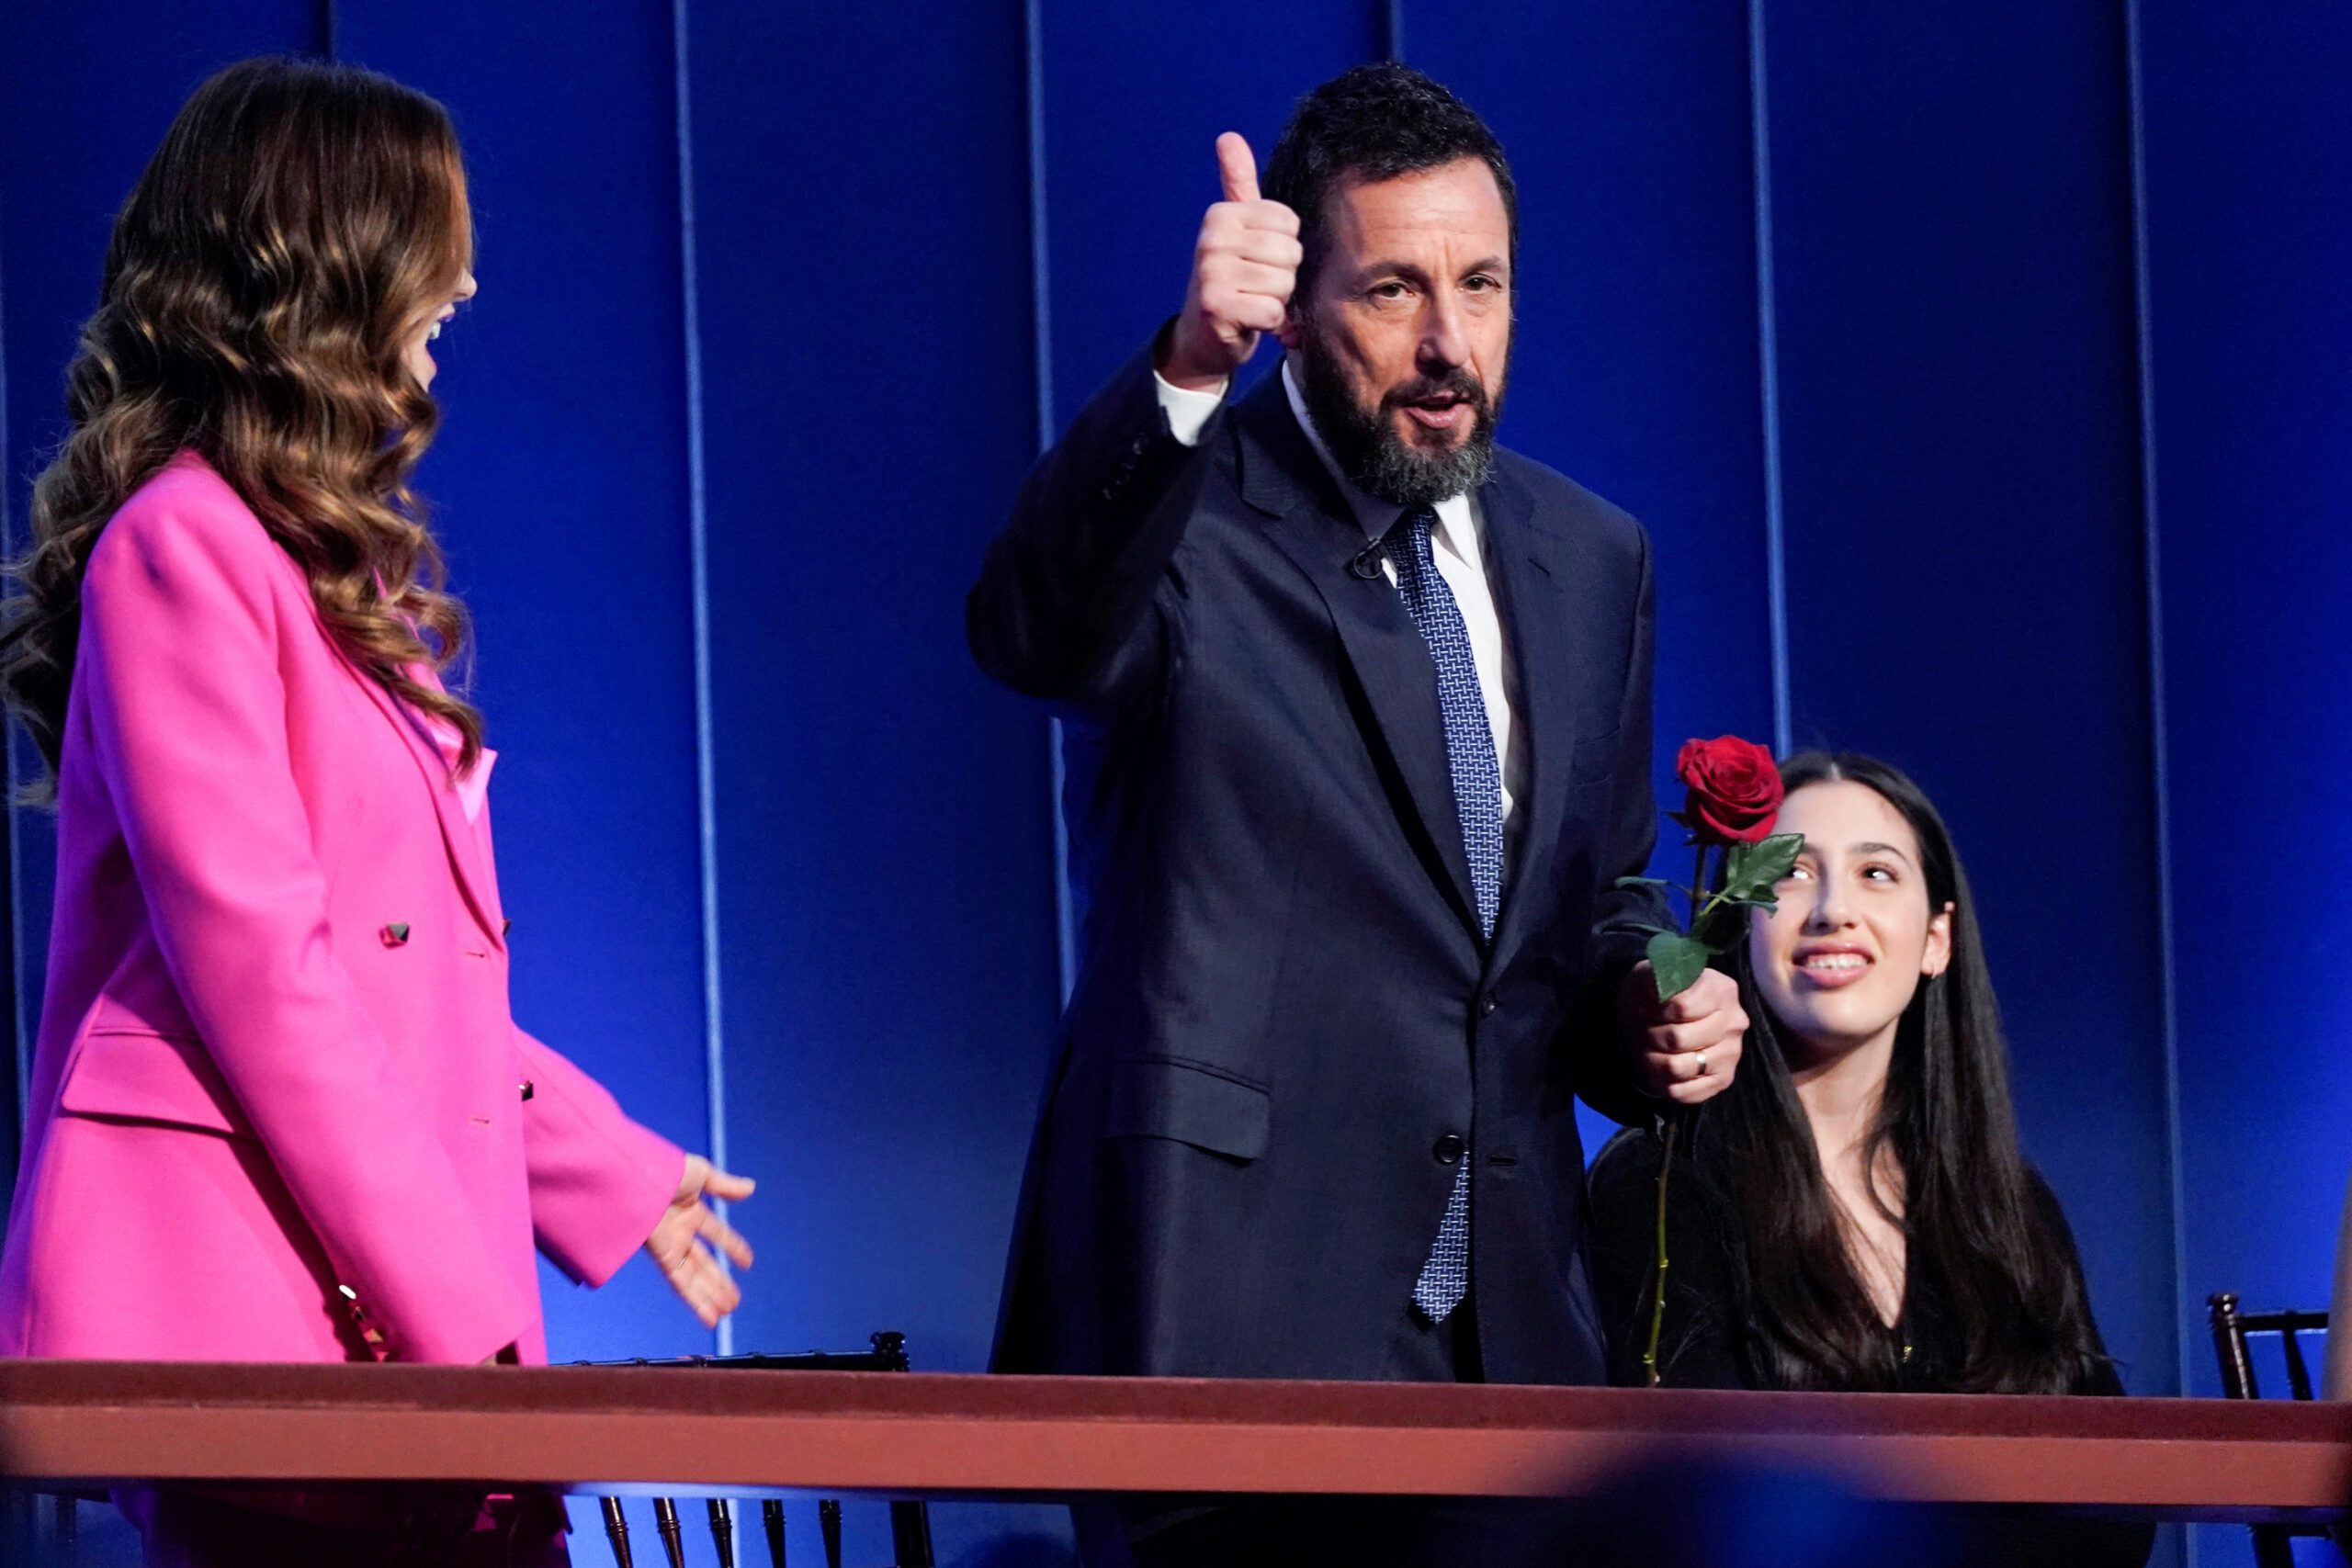 Adam Sandler honored with Kennedy Center’s Mark Twain Prize